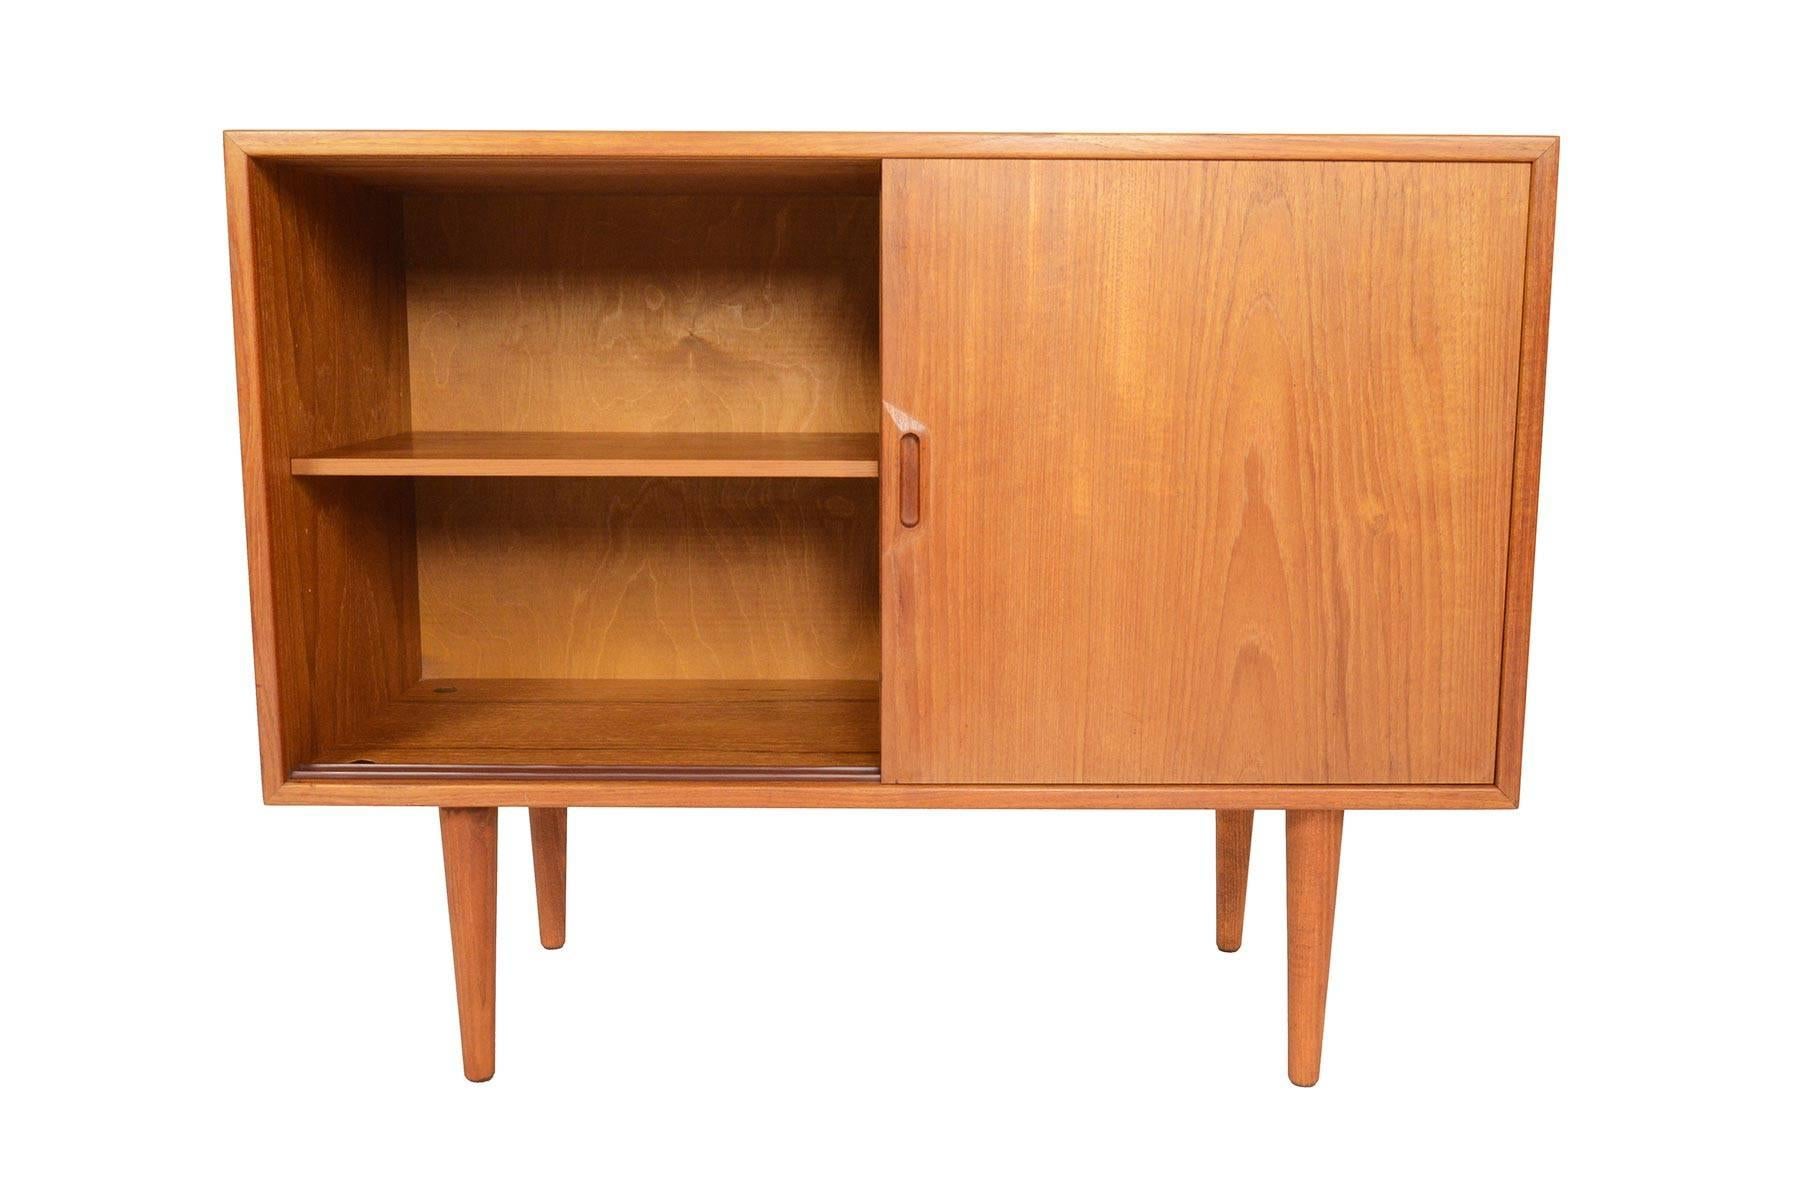 This gorgeous two-door credenza in teak was designed by Sven Ellekaer for Albert Hansen in the 1960s. Two sliding doors open to reveal a split interior cabinet with adjustable teak shelving for plenty of storage. In excellent original condition.